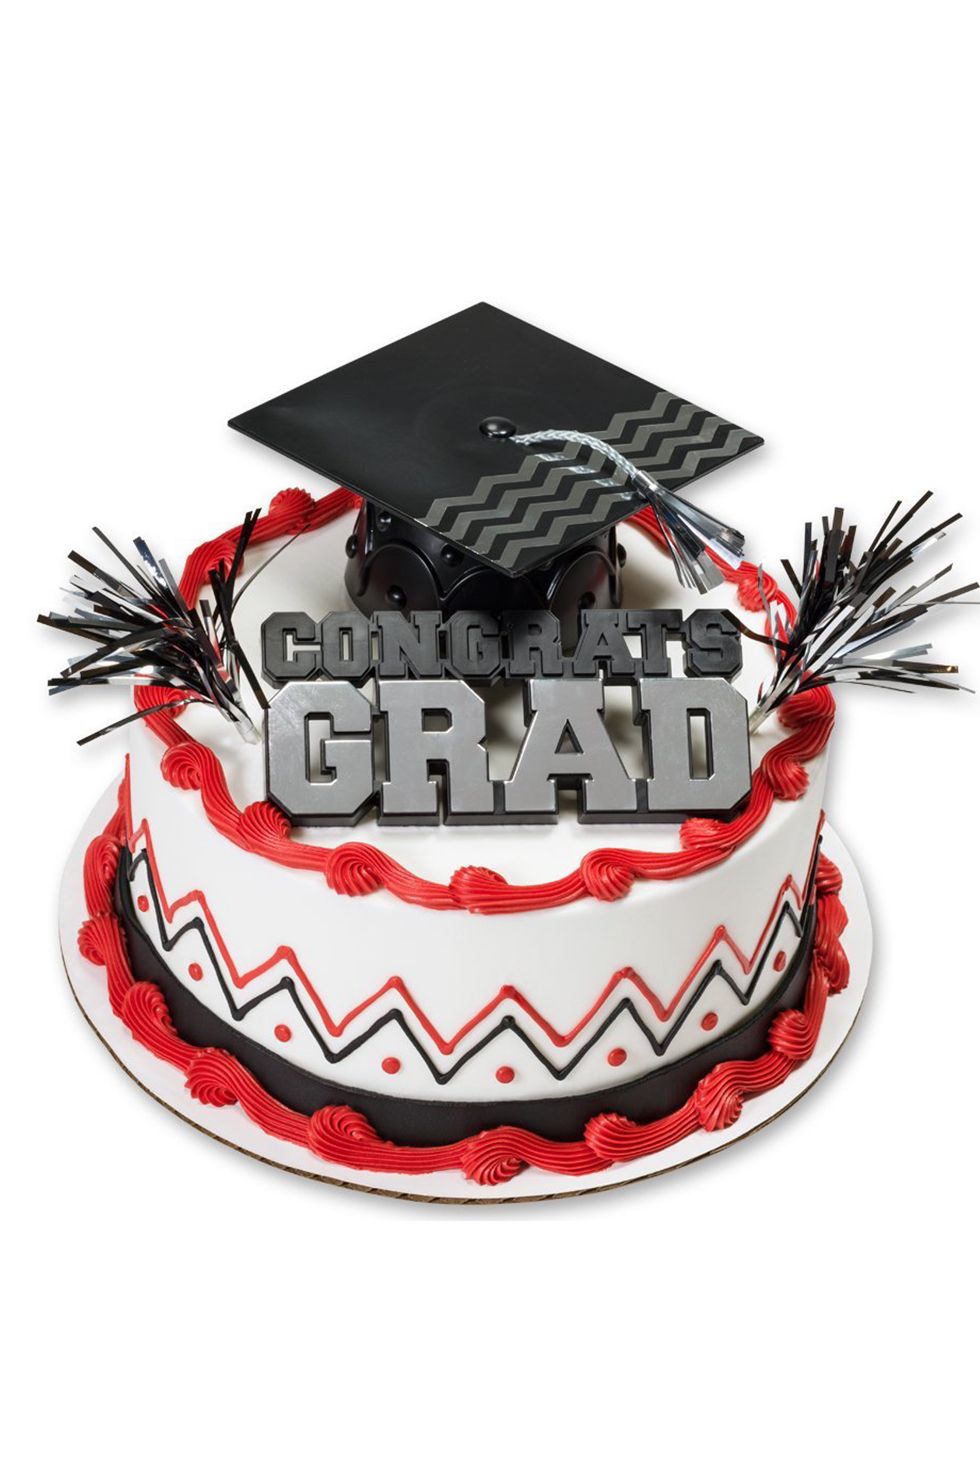 15 Easy Graduation Cake Ideas 2018 Decorations For High School And College Cakes